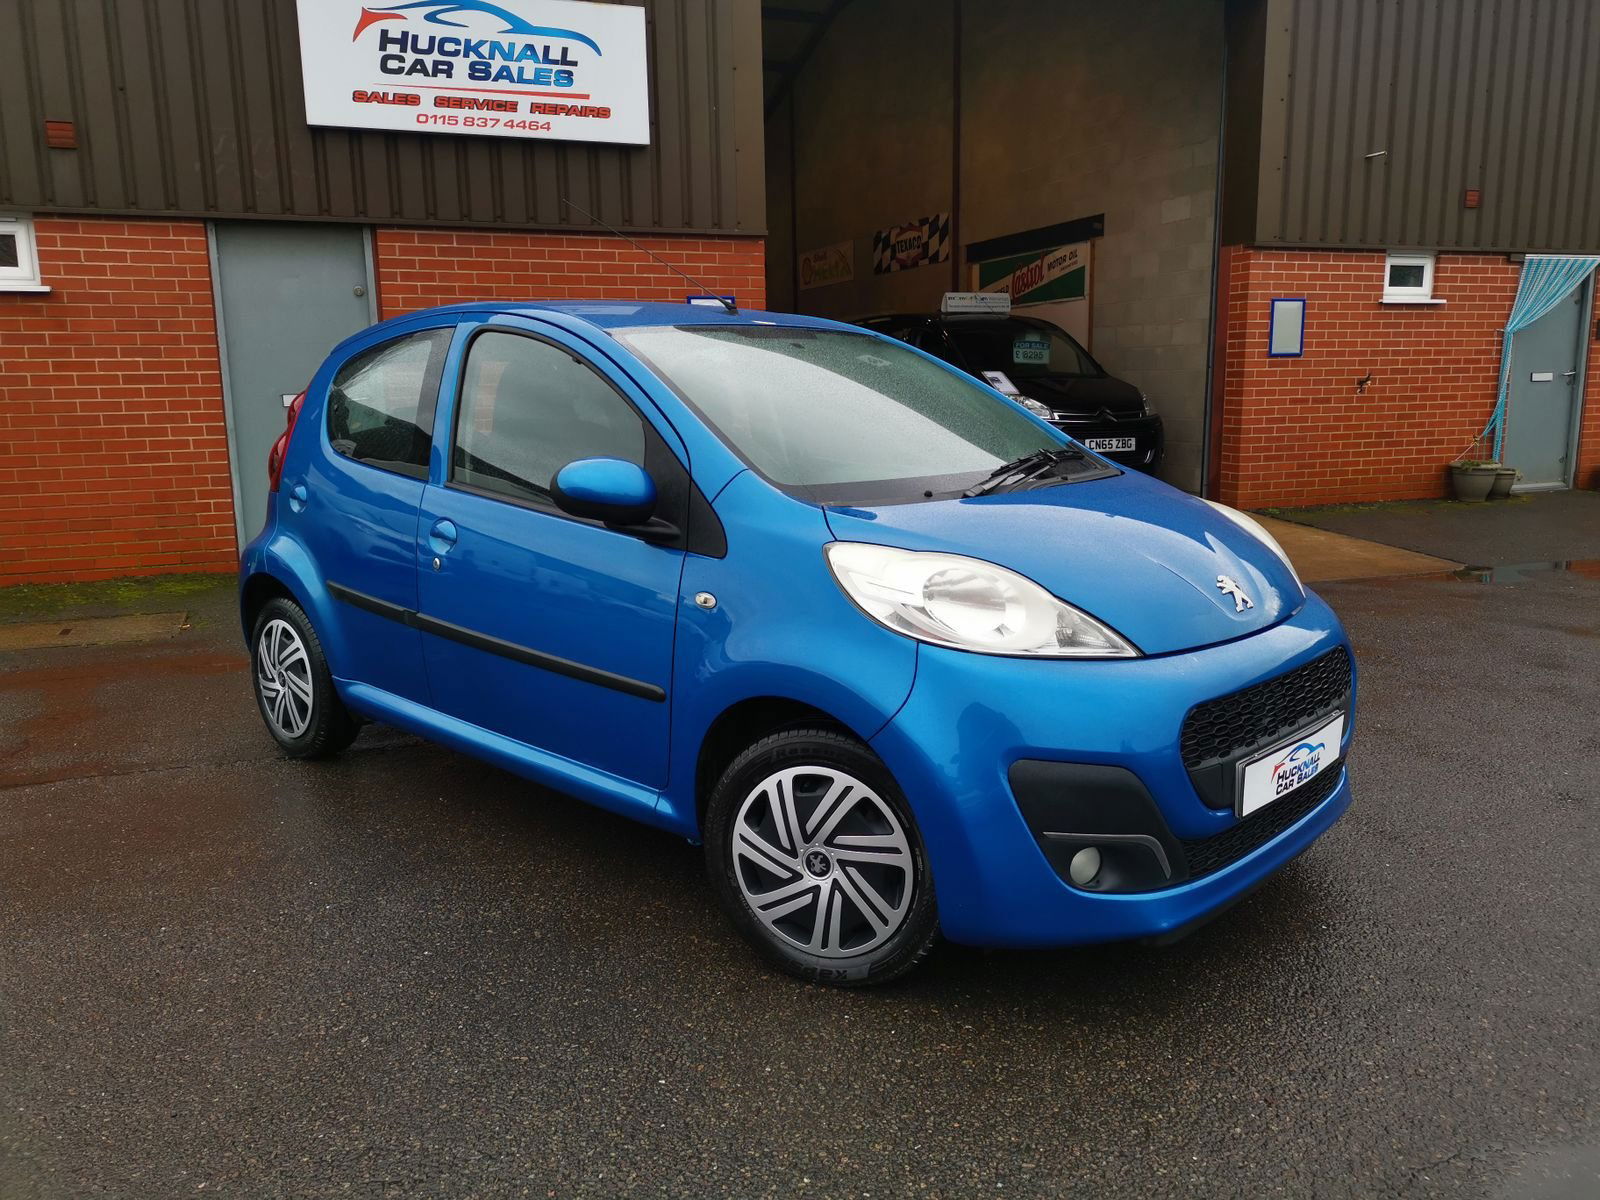 USED Peugeot 107 ACTIVE 2012 5dr Manual (FH12JYE)